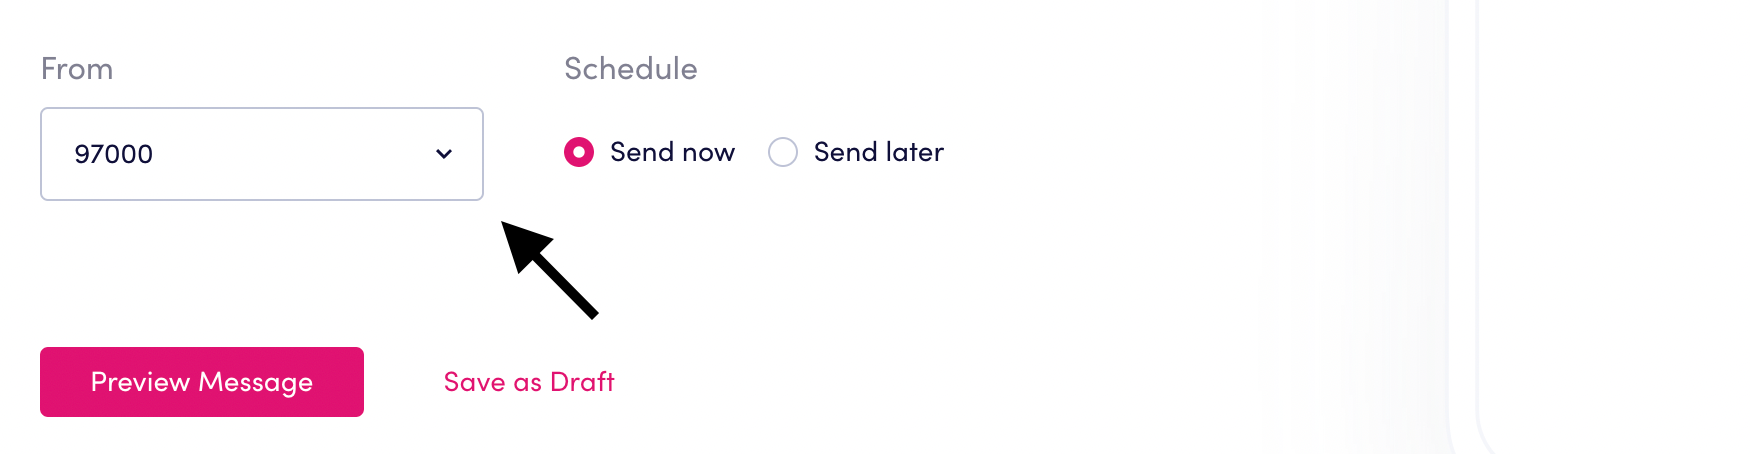 Platform view of message options: What number to send from, send now, or send later